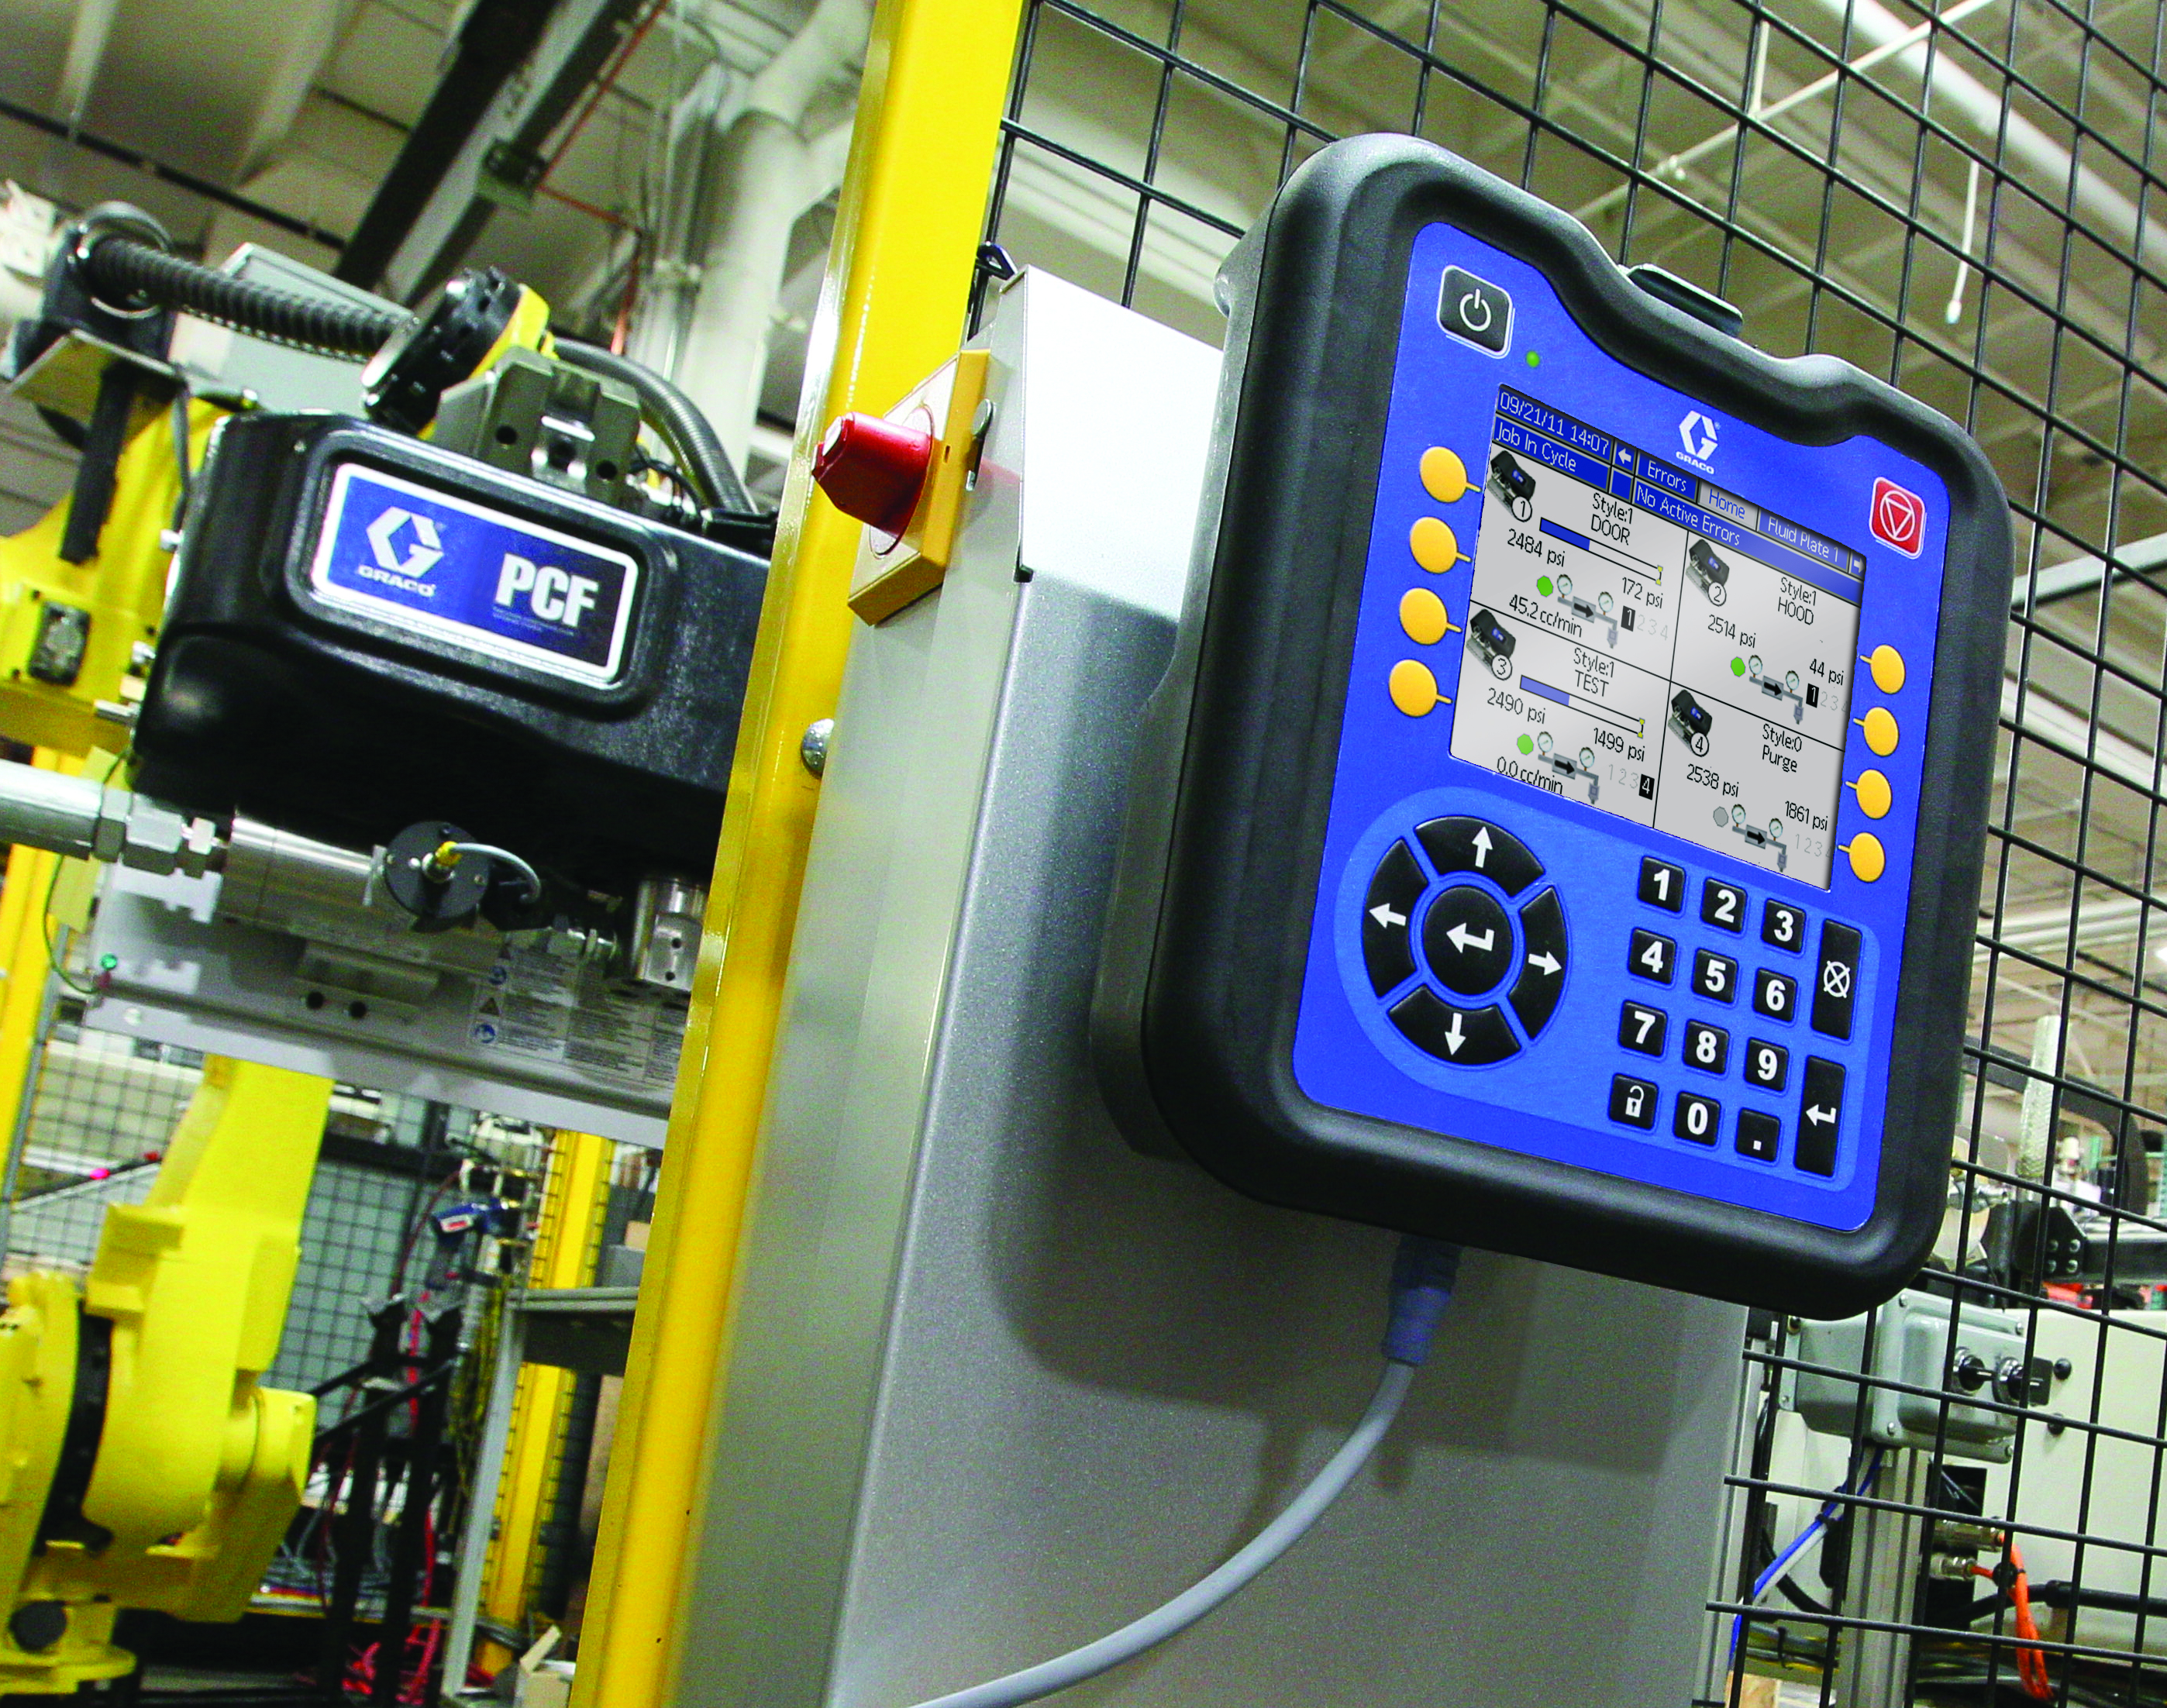 The Graco PCF metering system can handle ambient, warm melt and hot melt materials up to 400°F.